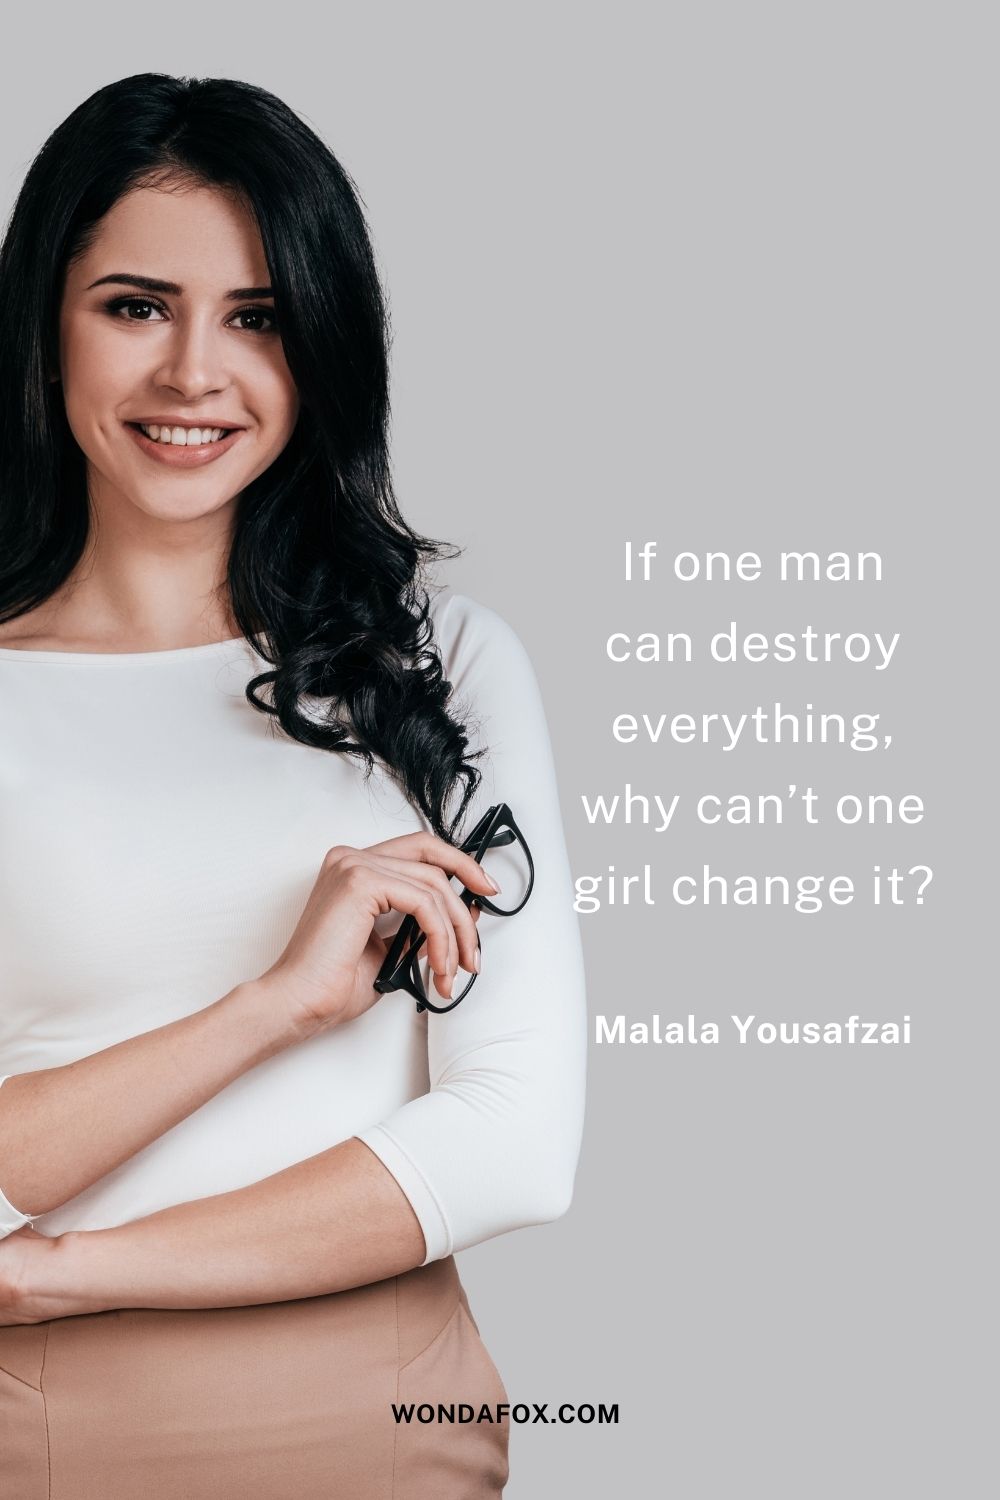 If one man can destroy everything, why can’t one girl change it?